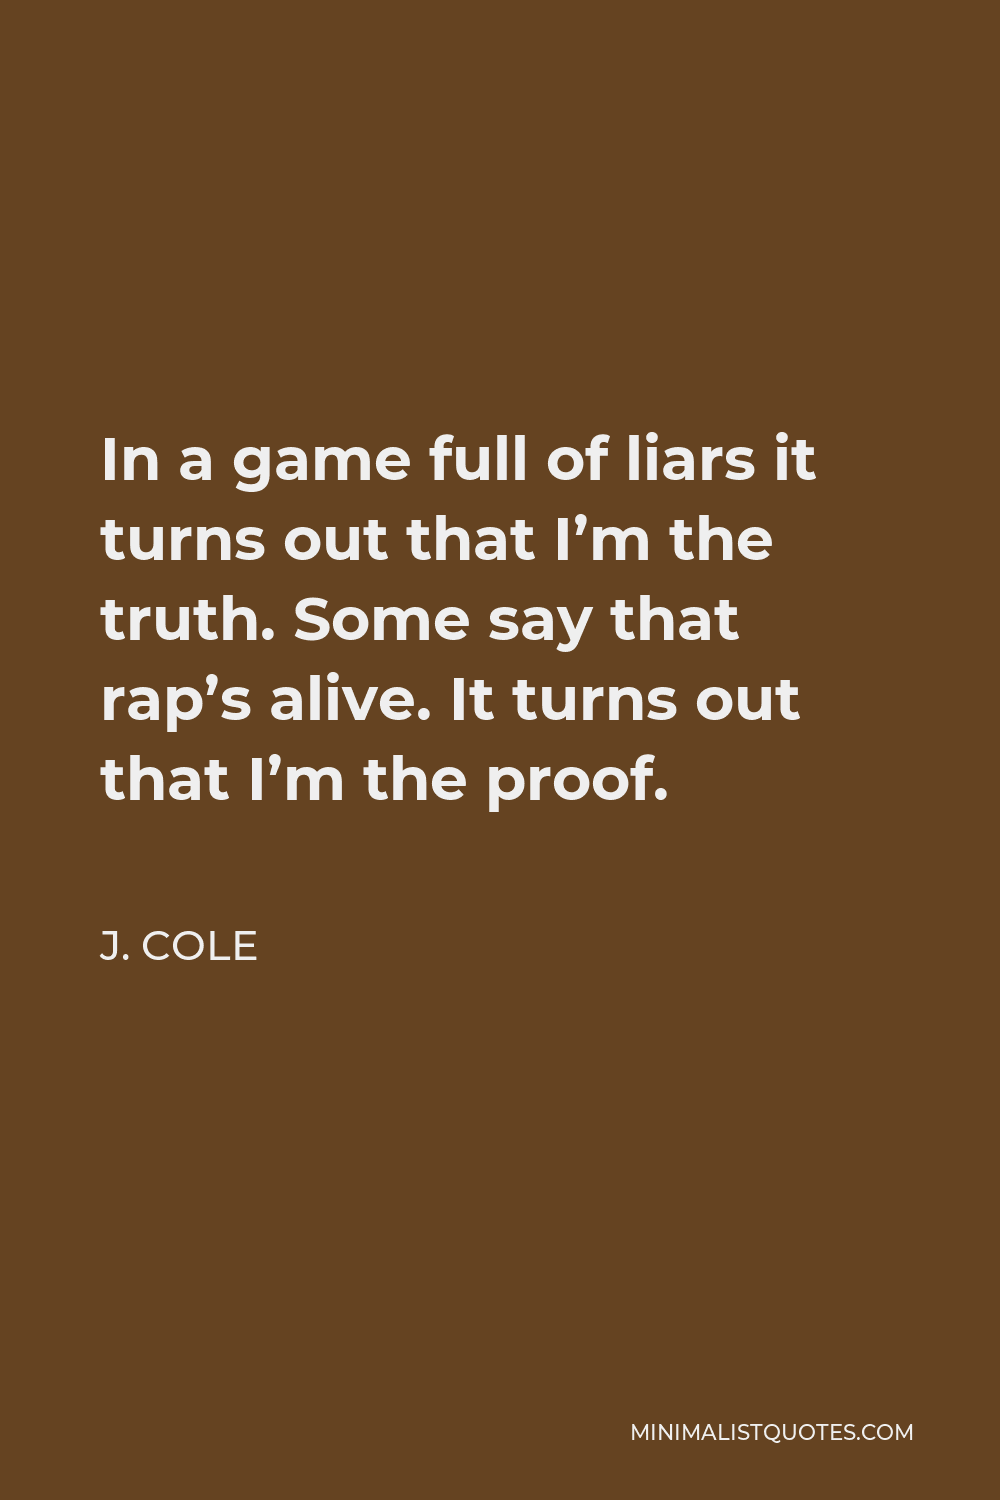 J. Cole Quote - In a game full of liars it turns out that I’m the truth. Some say that rap’s alive. It turns out that I’m the proof.